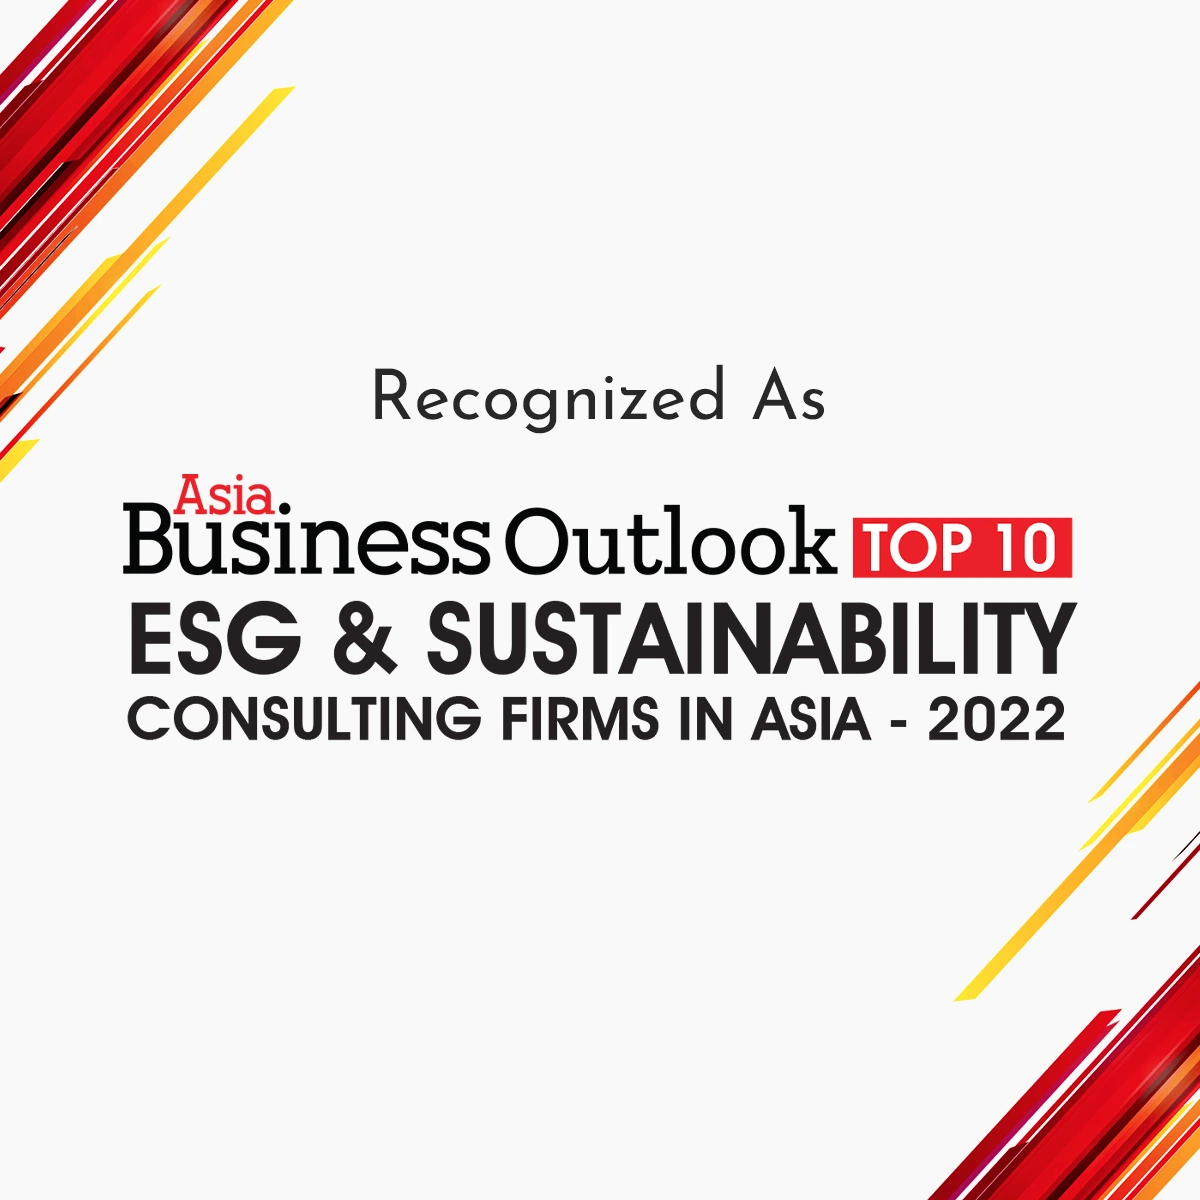 At Quest recognized as Top 10 in ESG and Sustainability in Asia